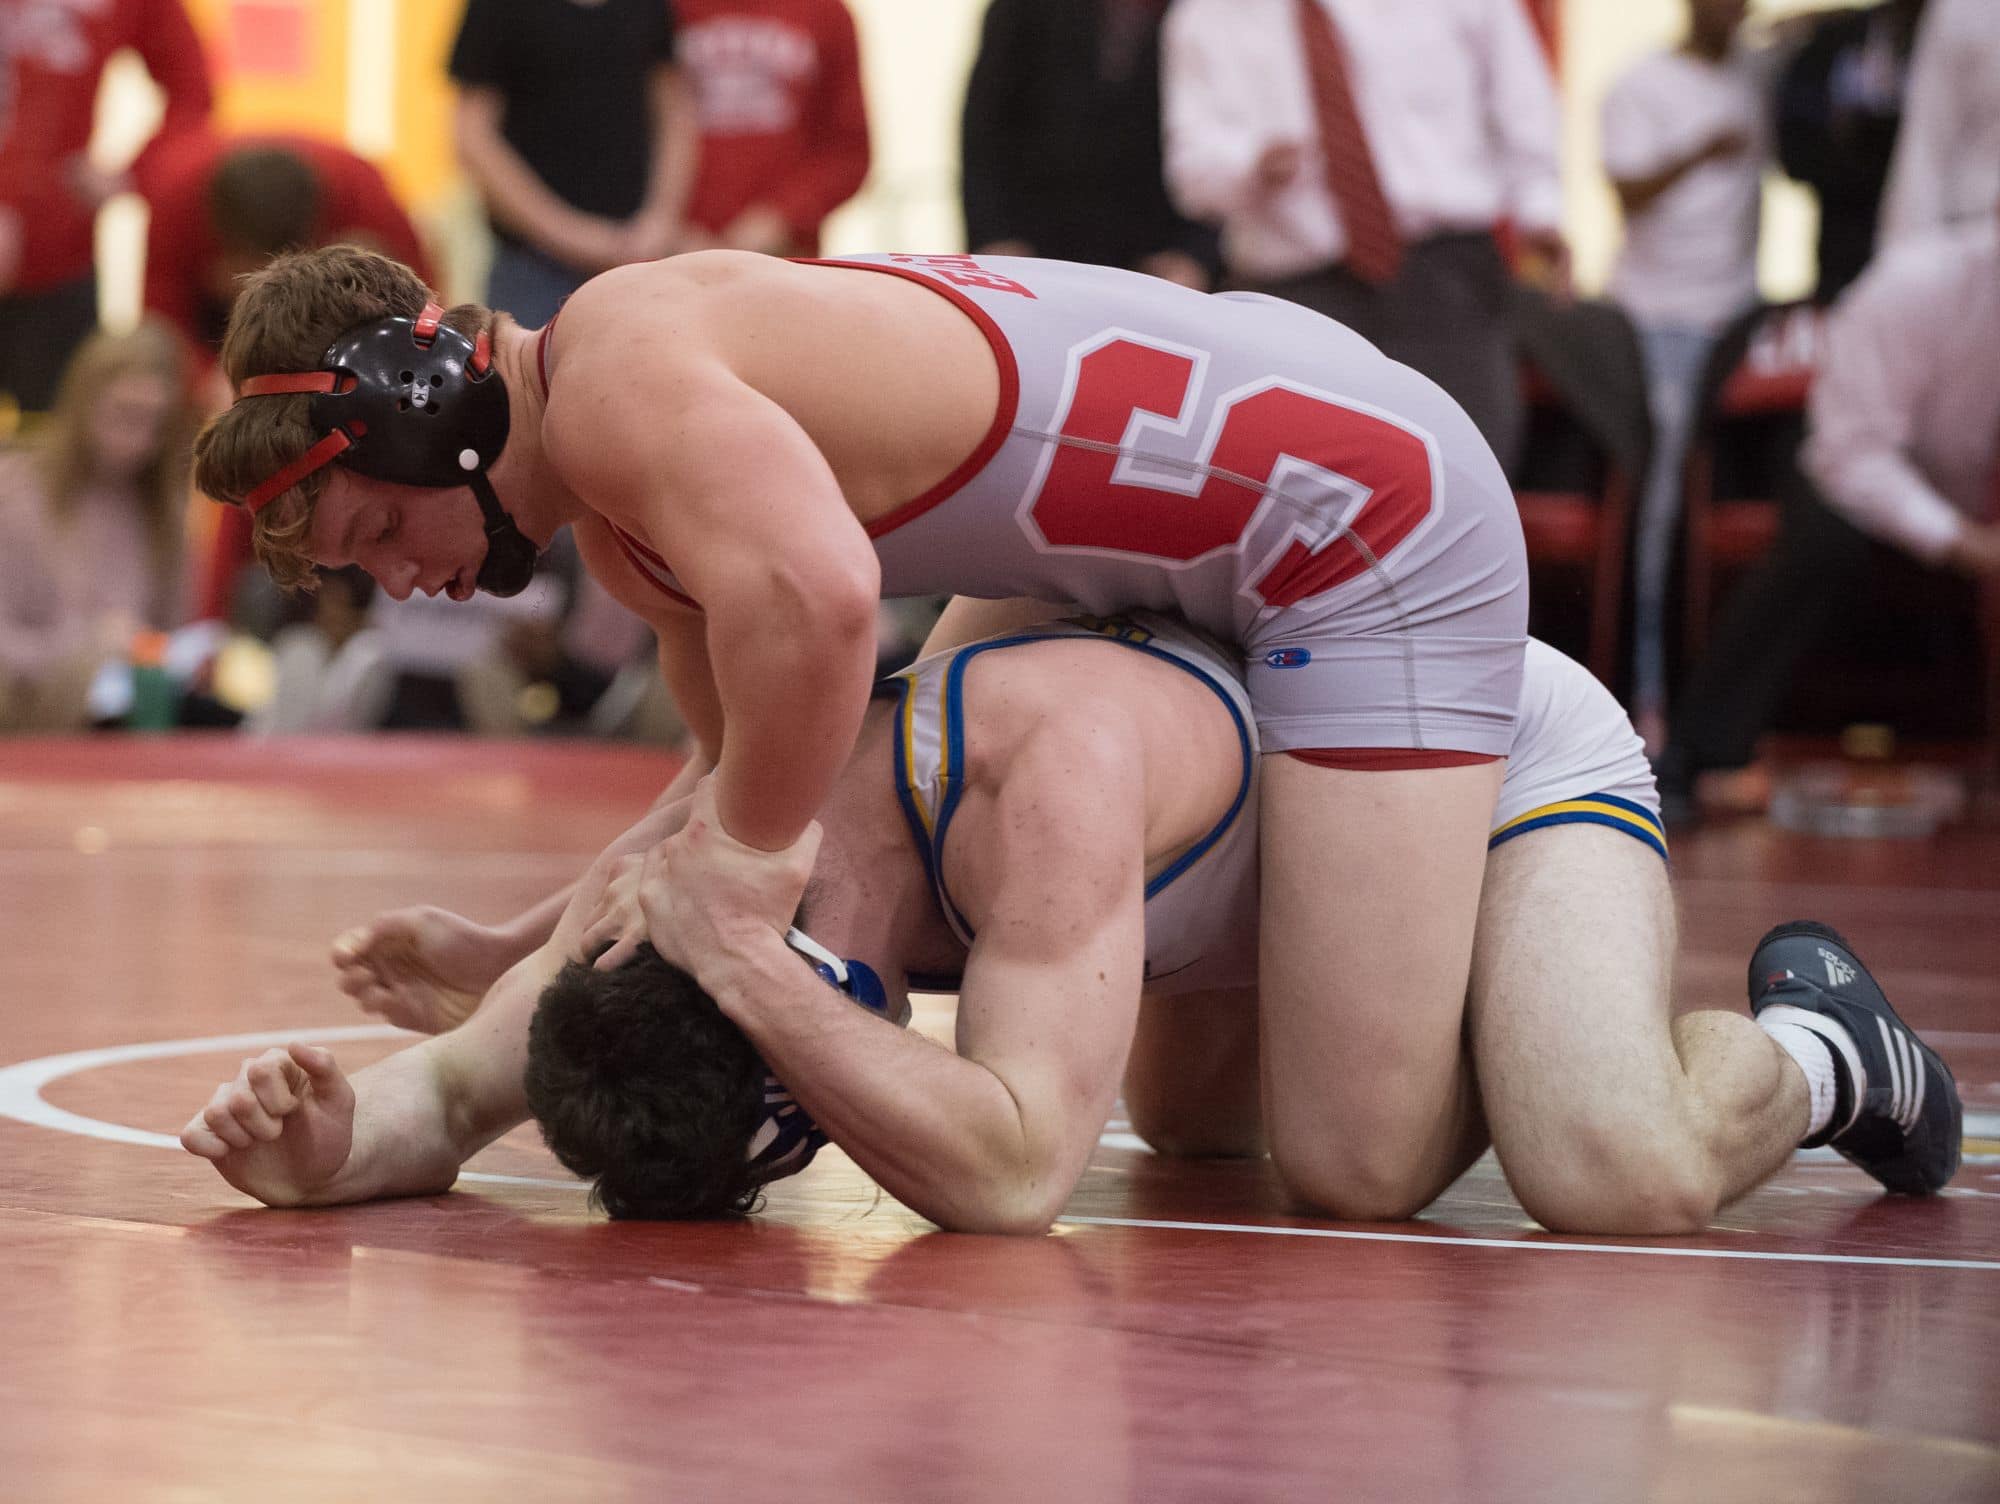 Smyrna's Larsen Wilson holds down Sussex Central's Lucas Hudson on the mat in the 182 pound match at DIAA Dual Meet Wrestling State Championship at Smyrna High School.